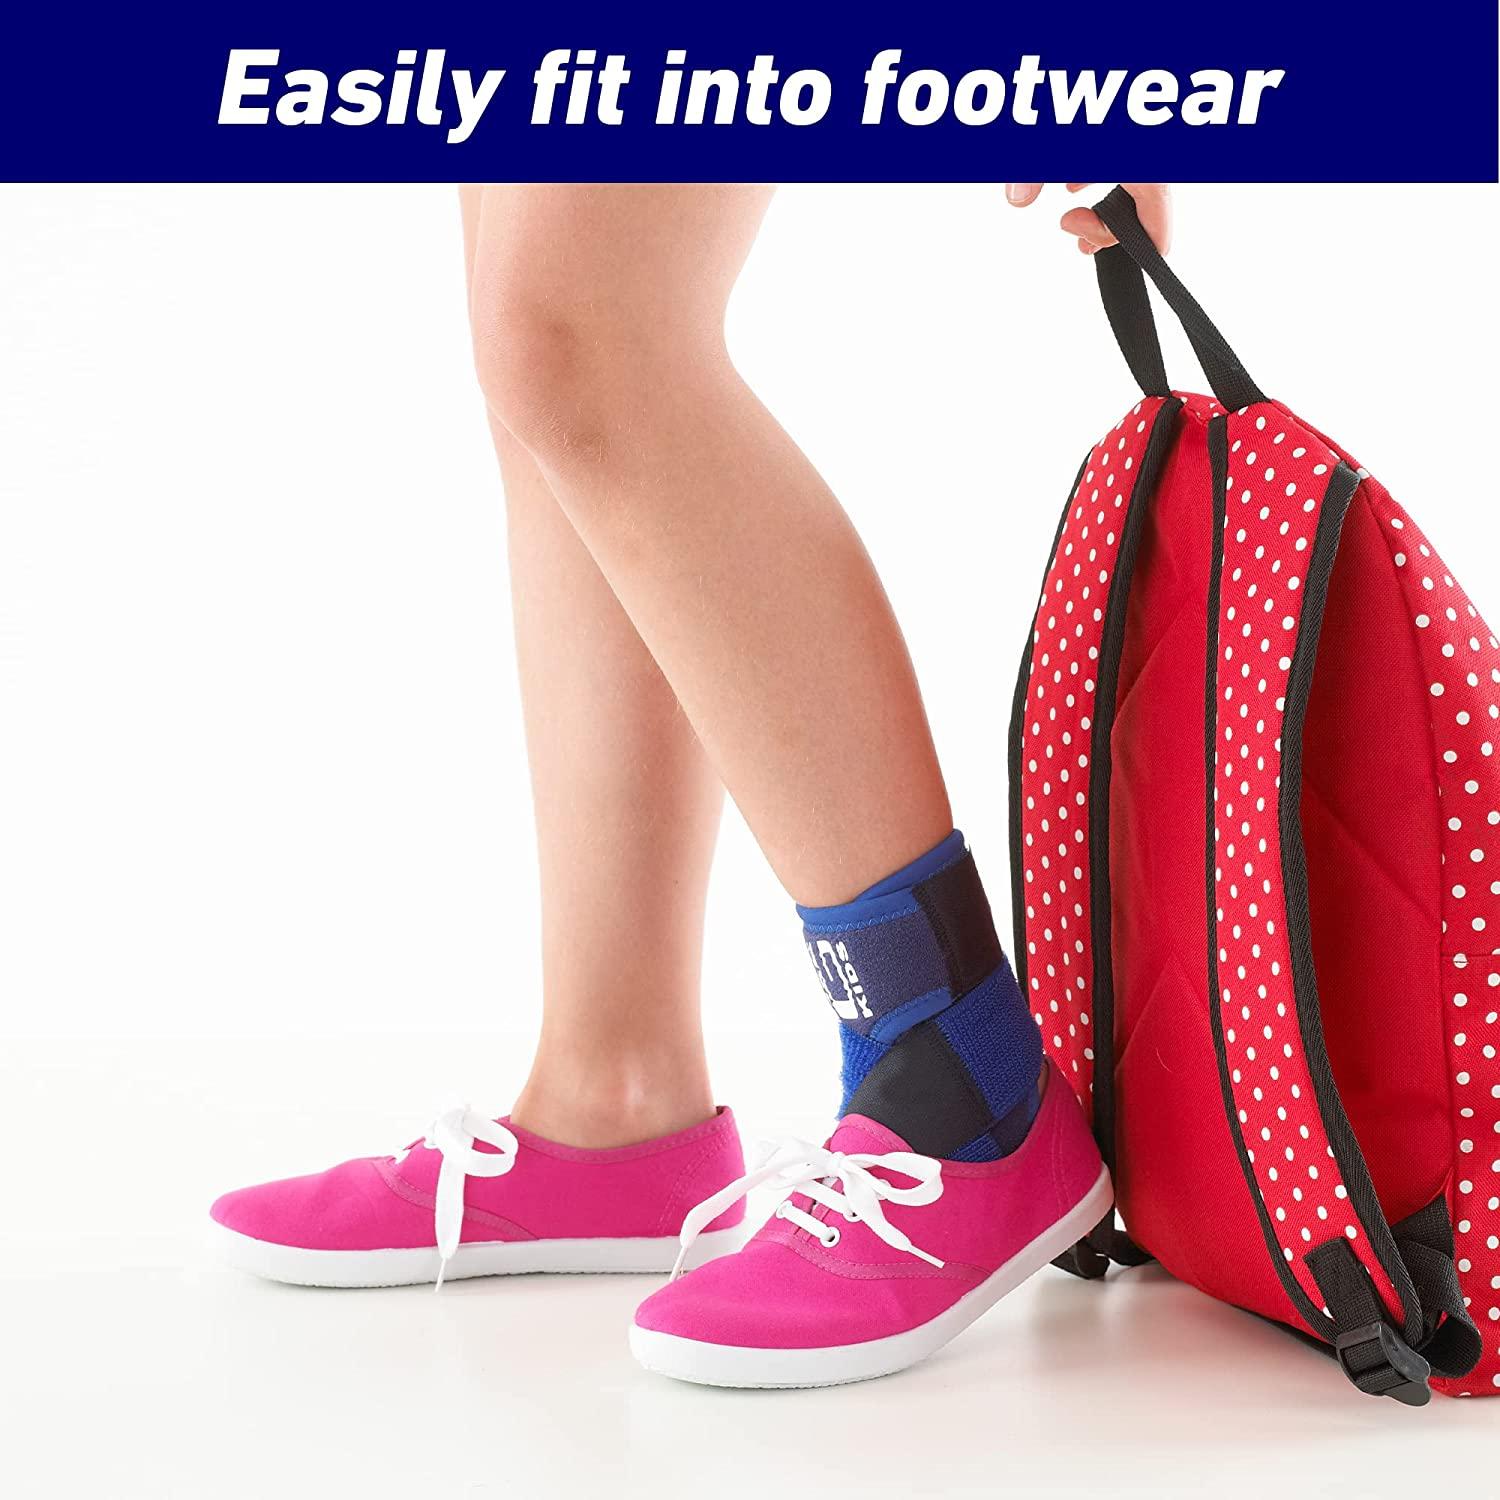 Neo G Ankle Support - One Size, Health